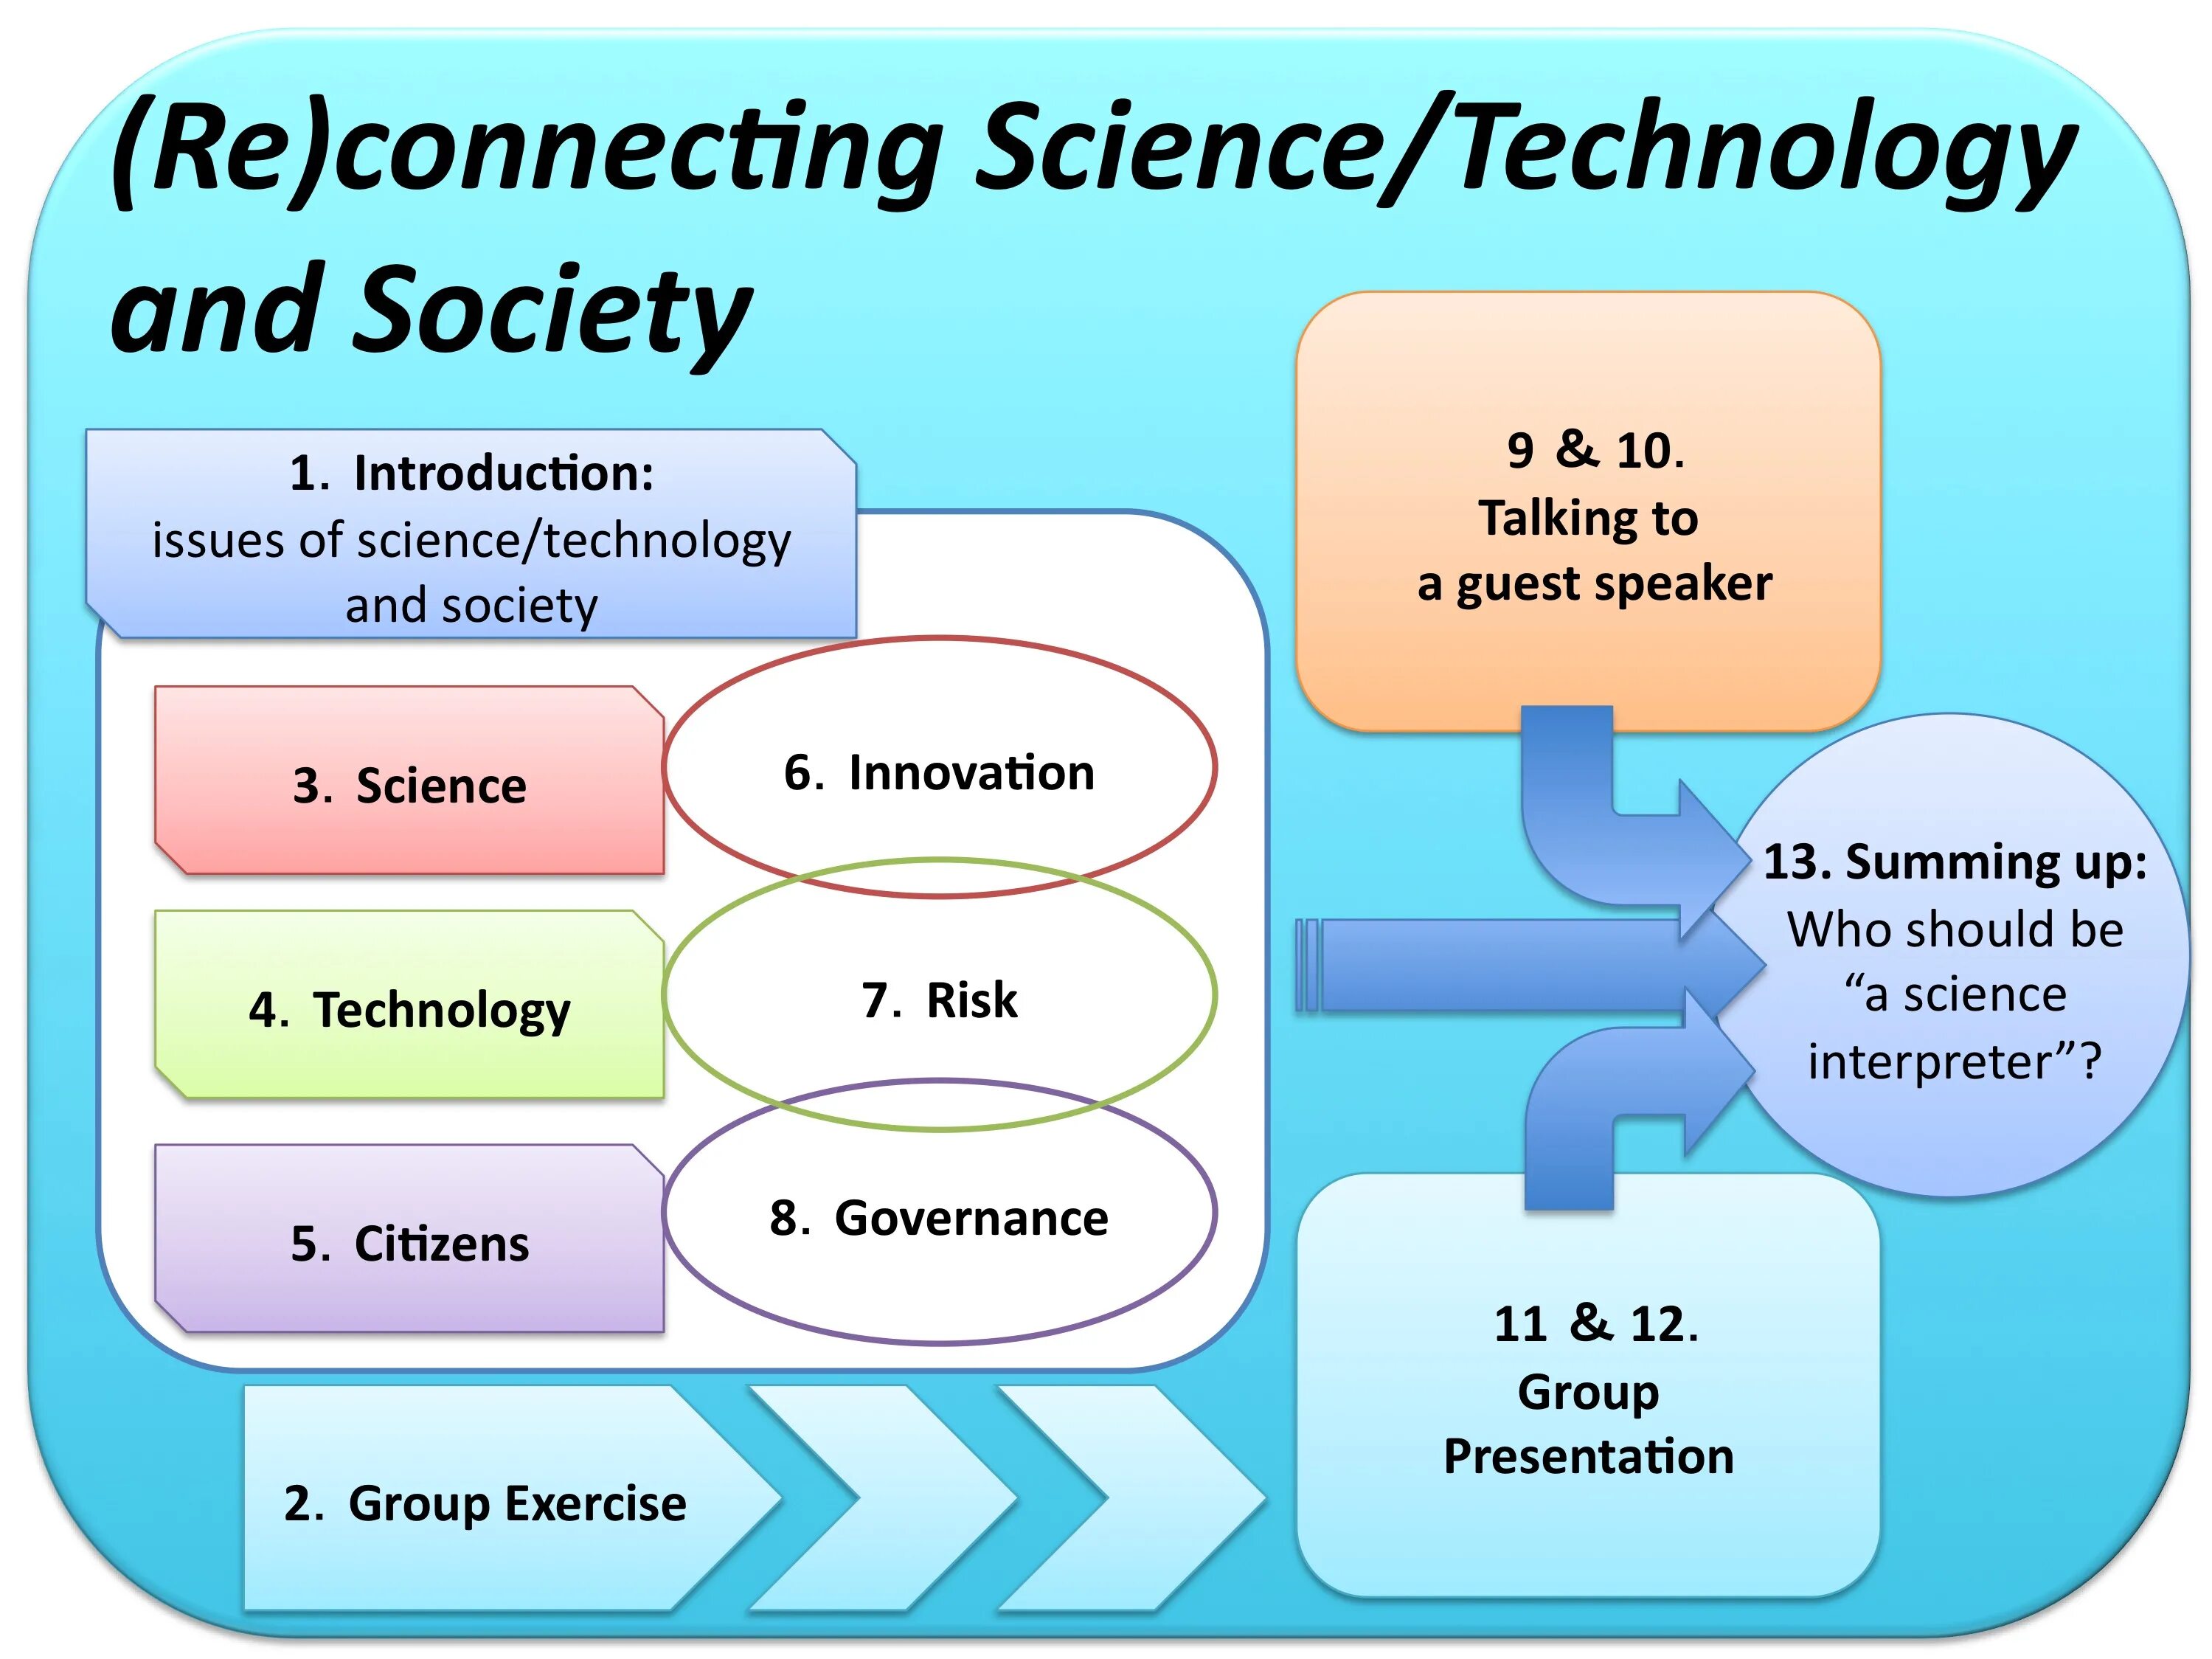 Technology and society. Science and Technology презентация. Science Technology and Society. Презентация Science and progress.. Презентация на тему Science and Technology.